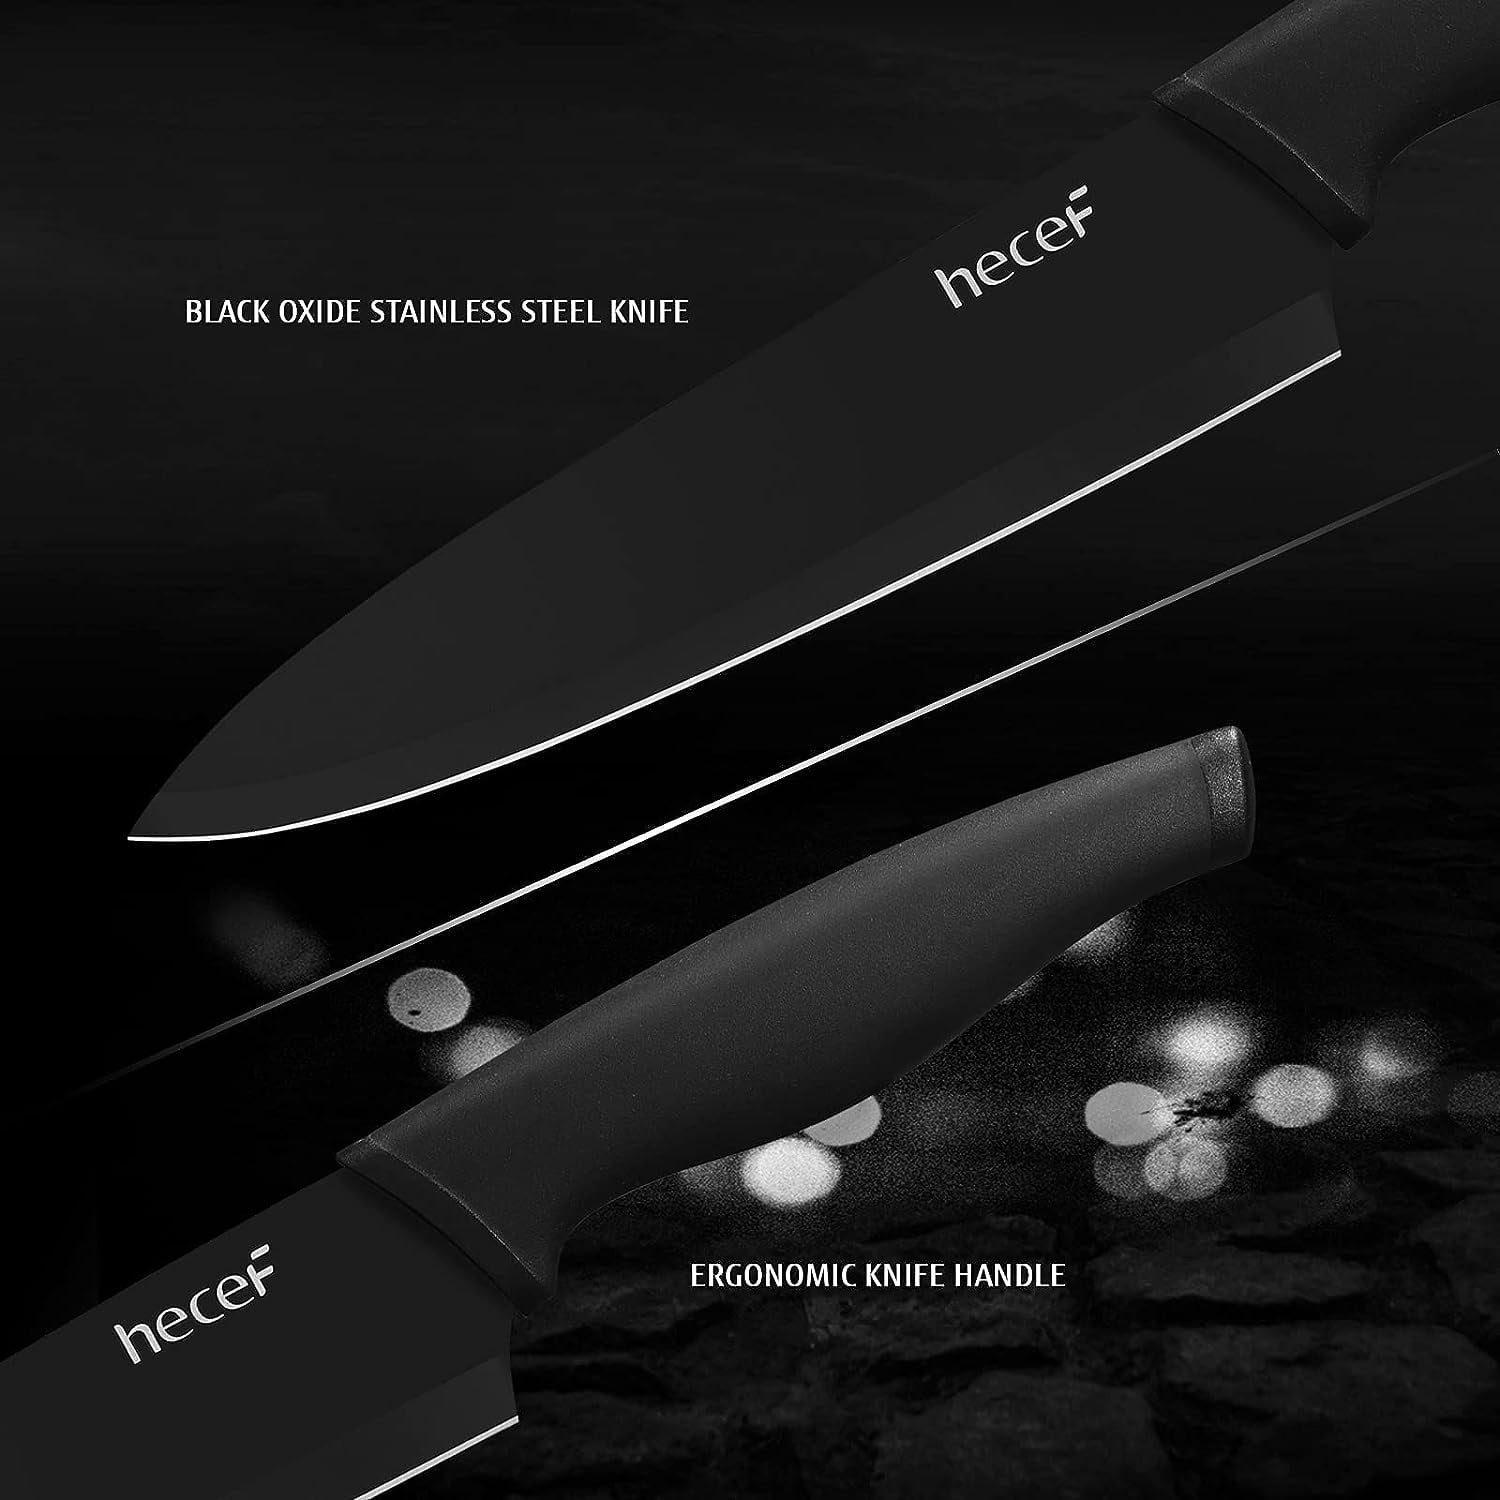 Kibhous 6 Pcs Kitchen Knife Set, Professional Kitchen Chef's Knives Set with Ultra Sharp Stainless Steel Blades and Nonstick Granite Coating, Easy